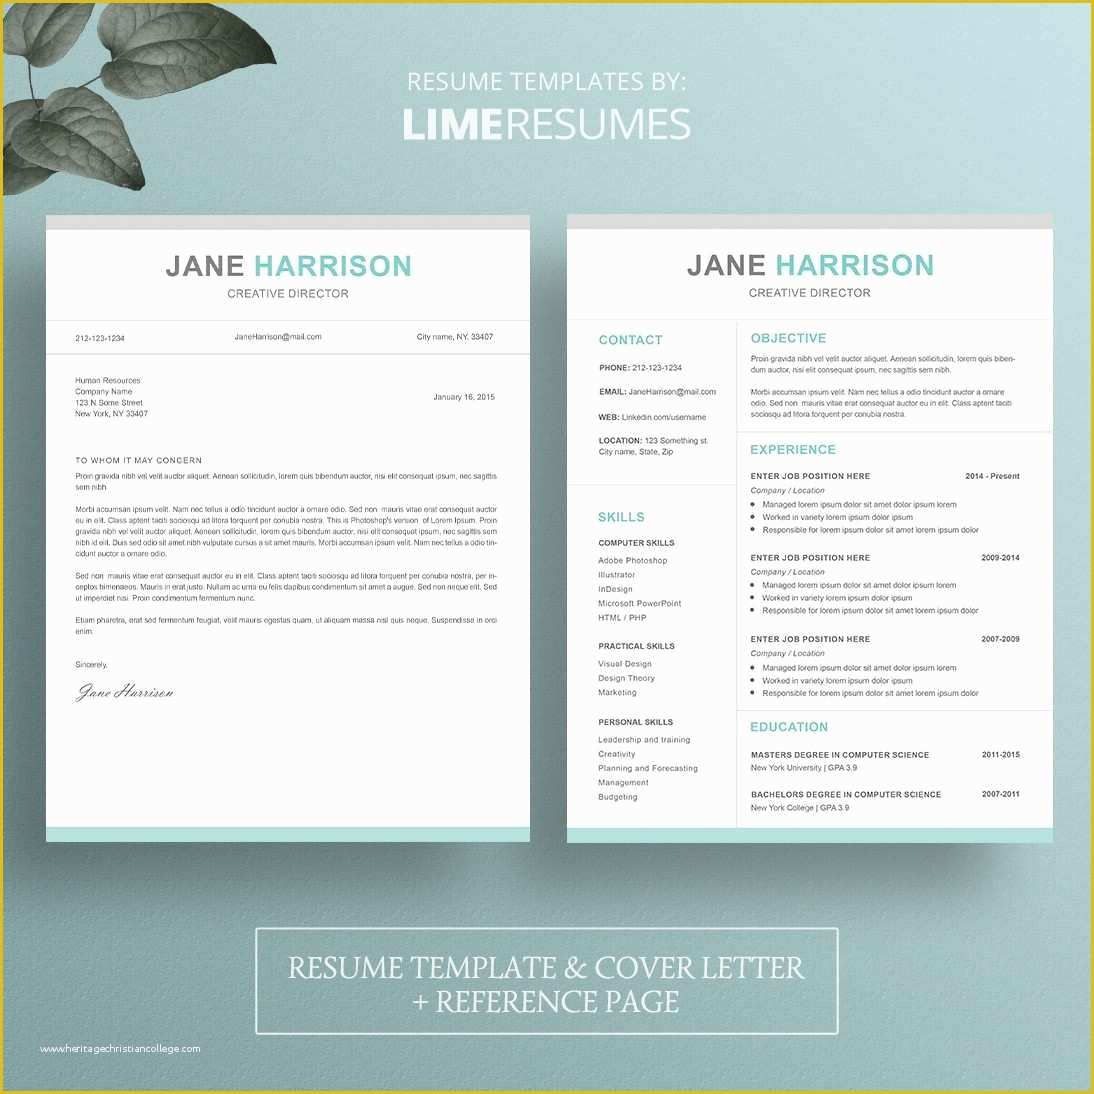 Resume Templates Free Download for Microsoft Word Of Creative Resume Templates Free Download for Microsoft Word